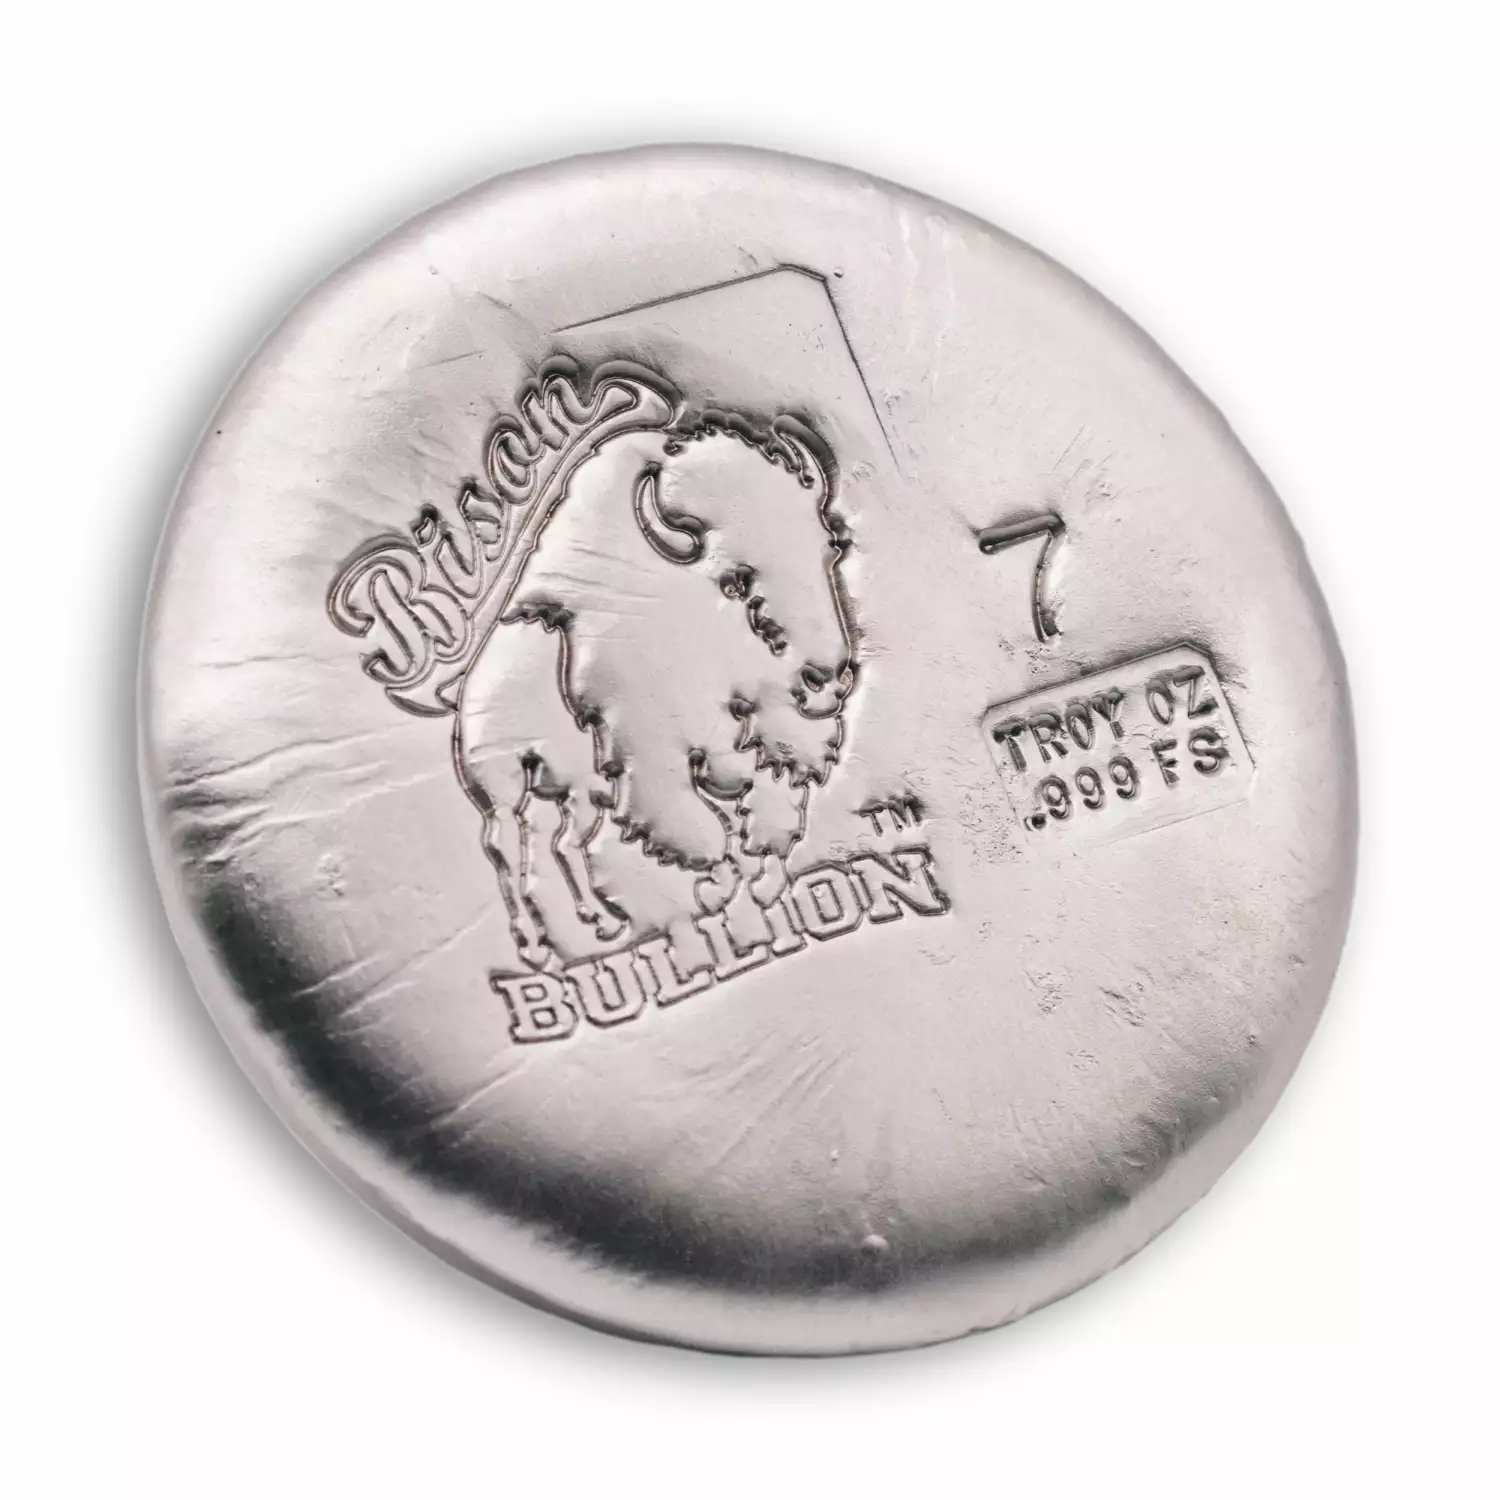 7 Troy Ounce Standard Round (5)